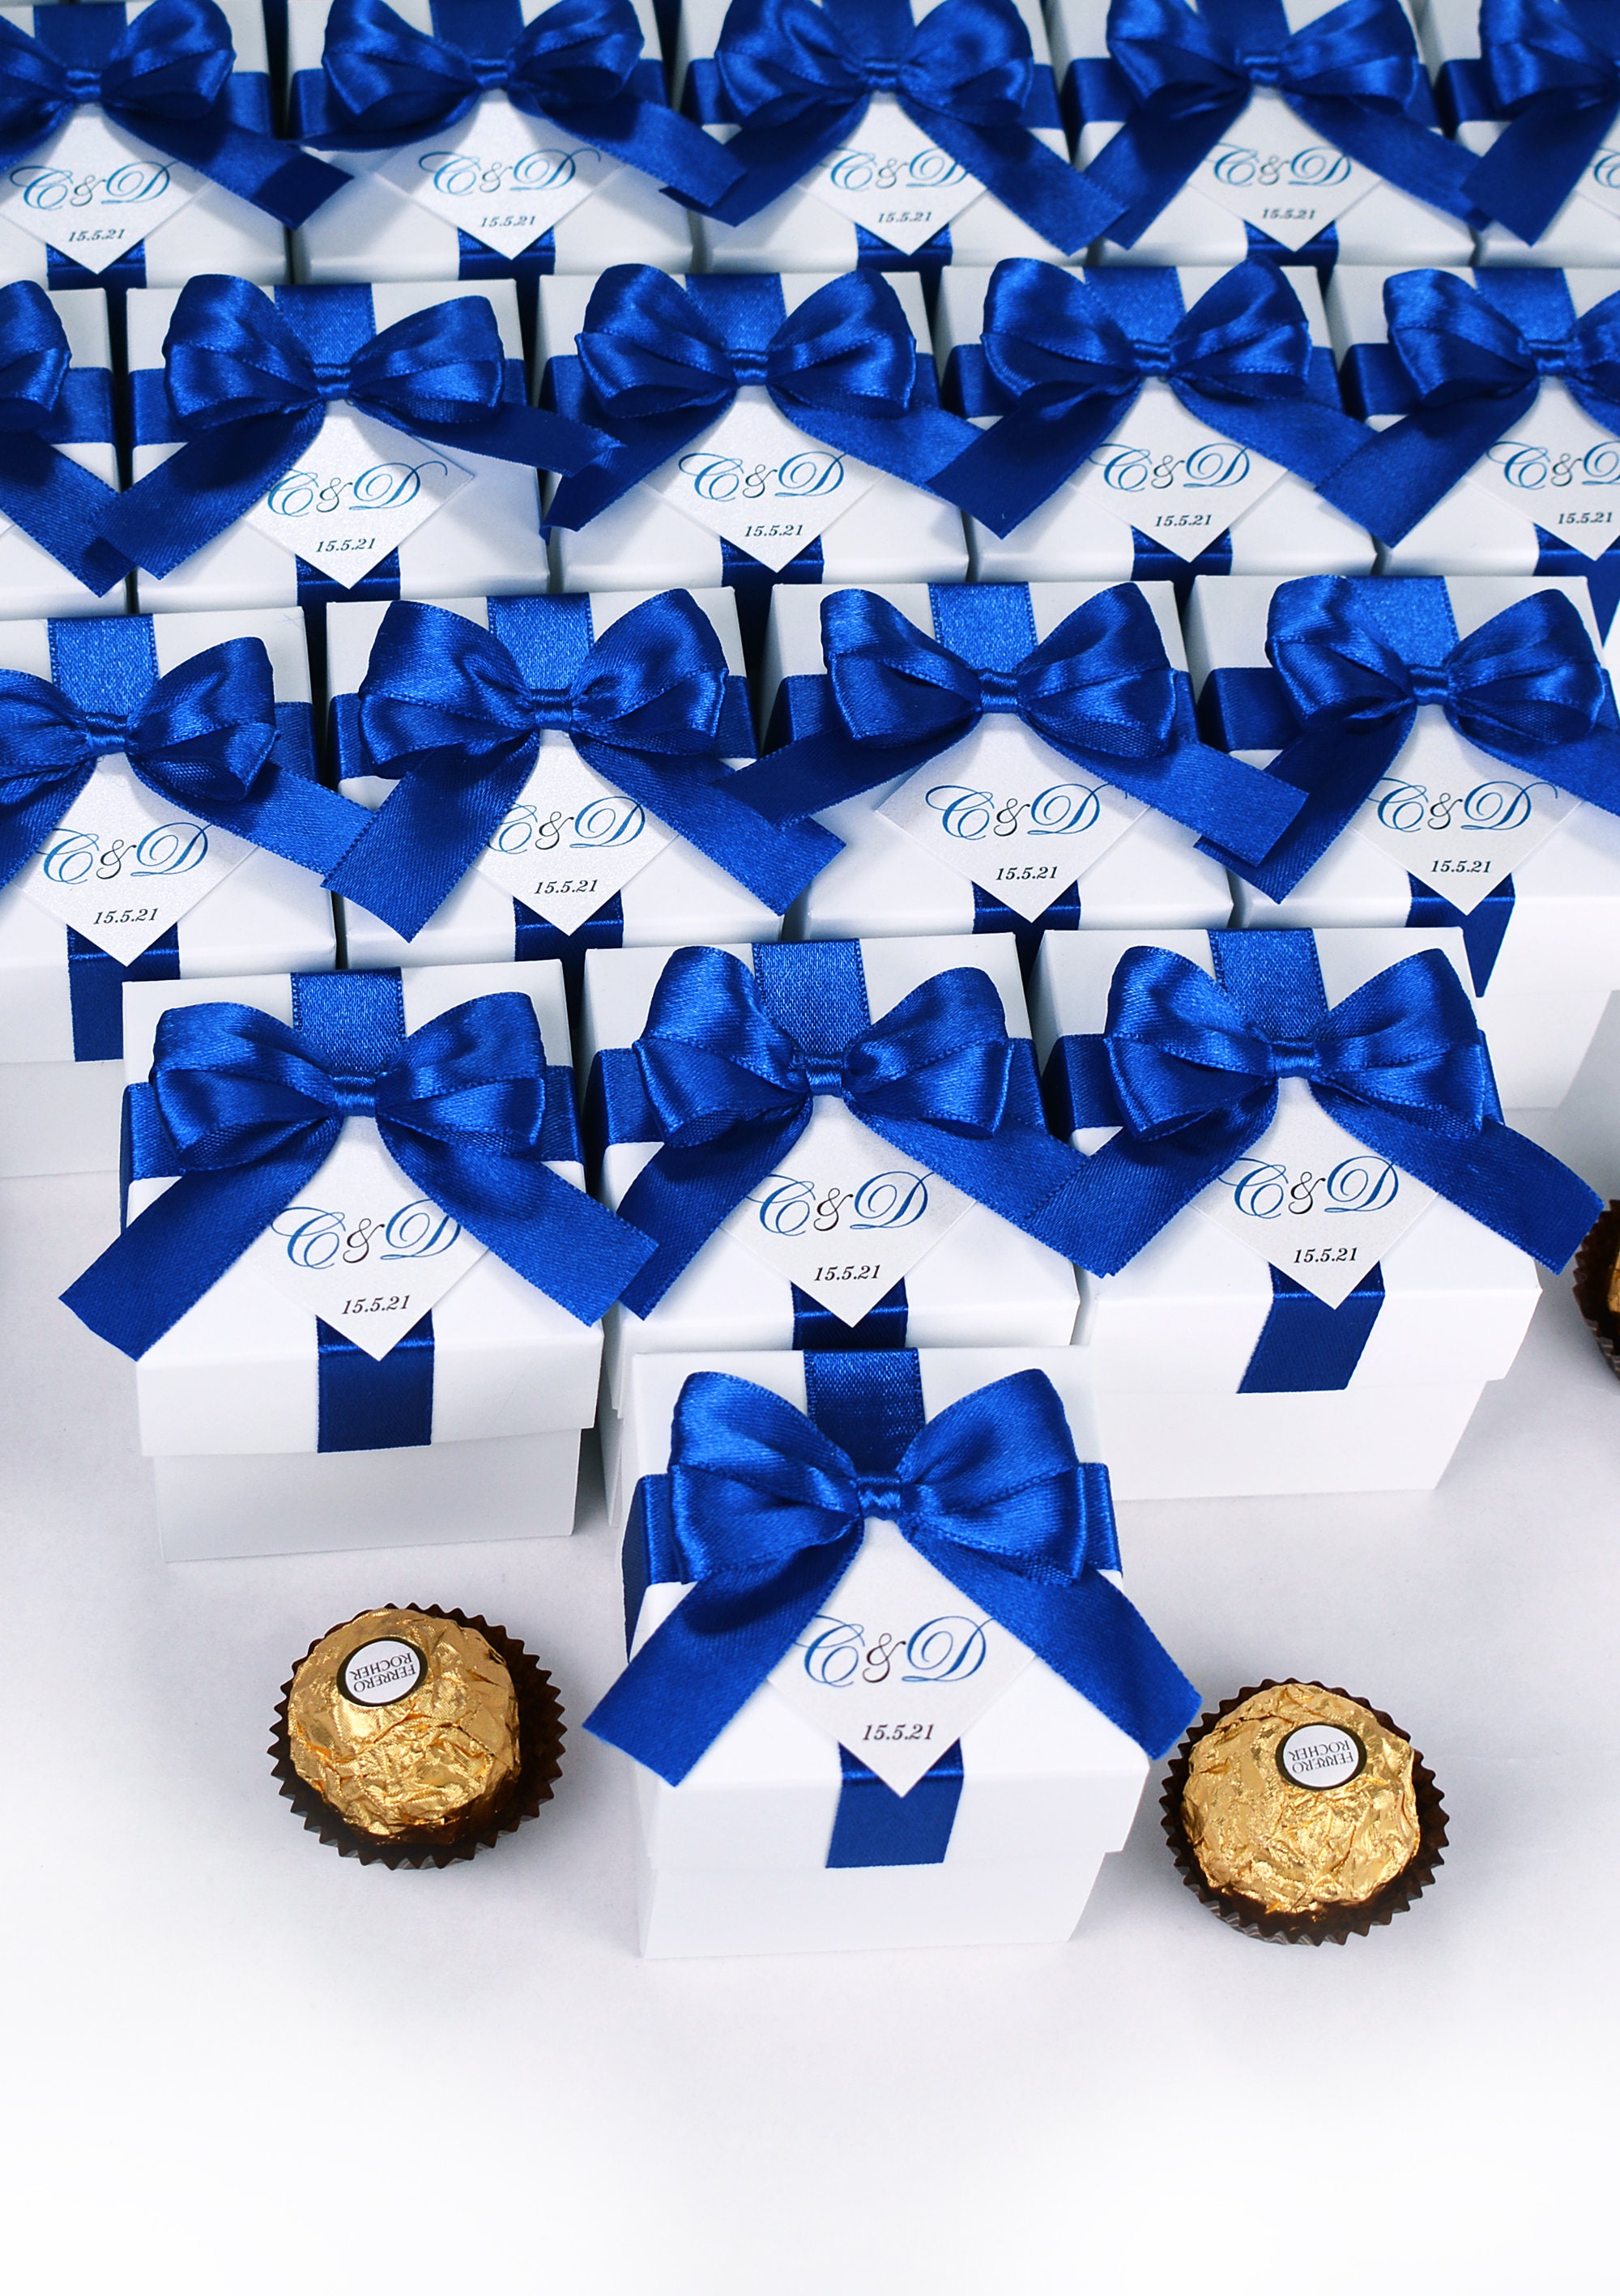 100pcs Wedding Favors For Guests In Bulk Dusty Blue Party Decorations Gift  Box Bonbonniere With Ribbon - AliExpress